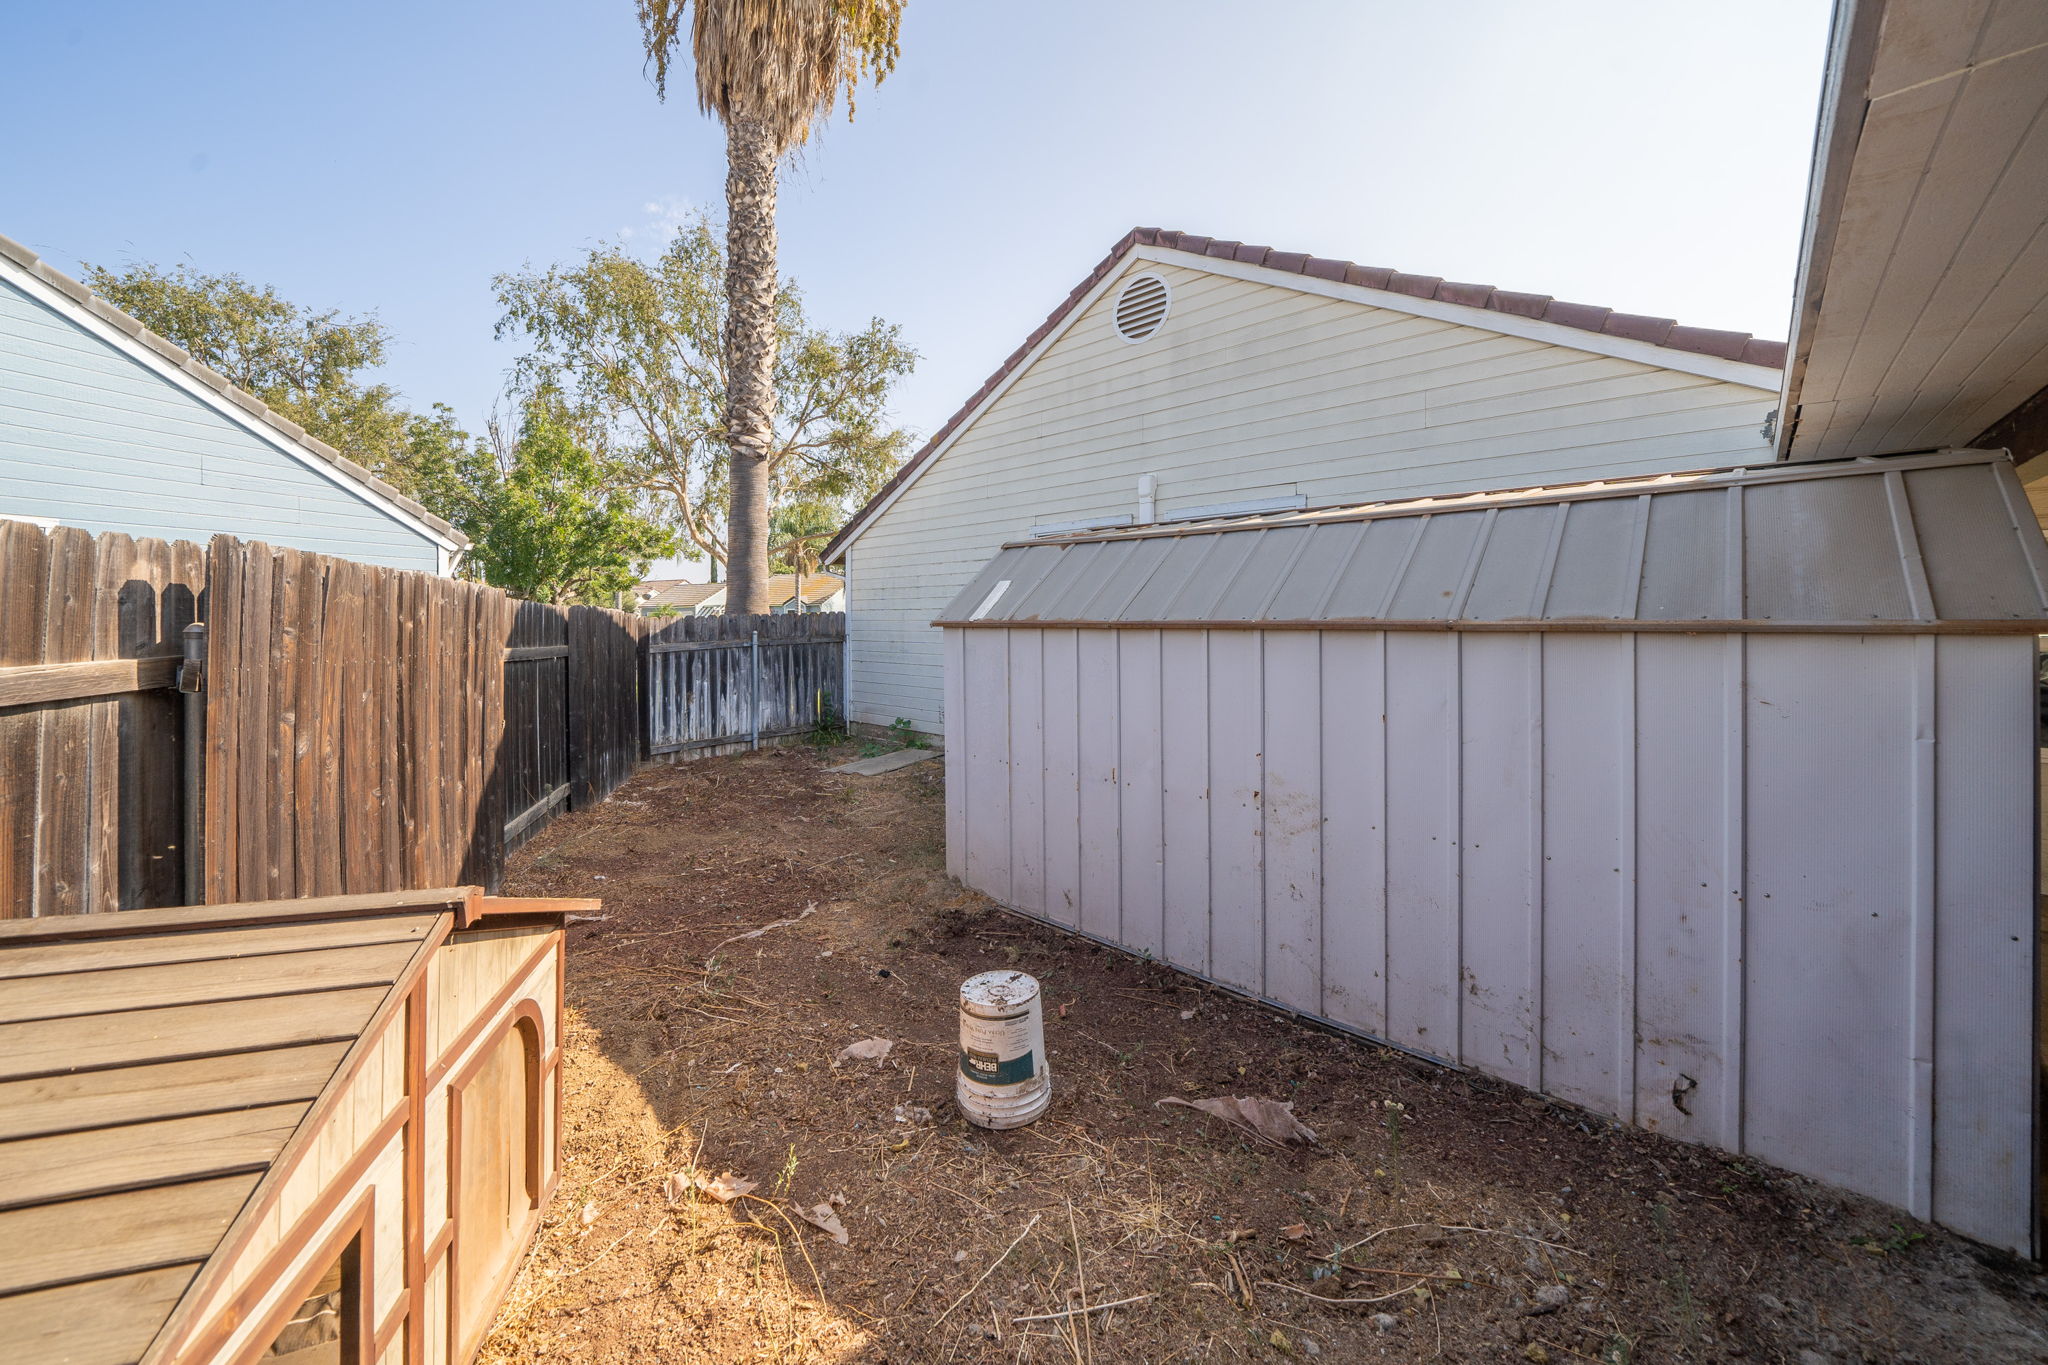  6203 Country View Ln, Riverside, CA 92504, US Photo 34